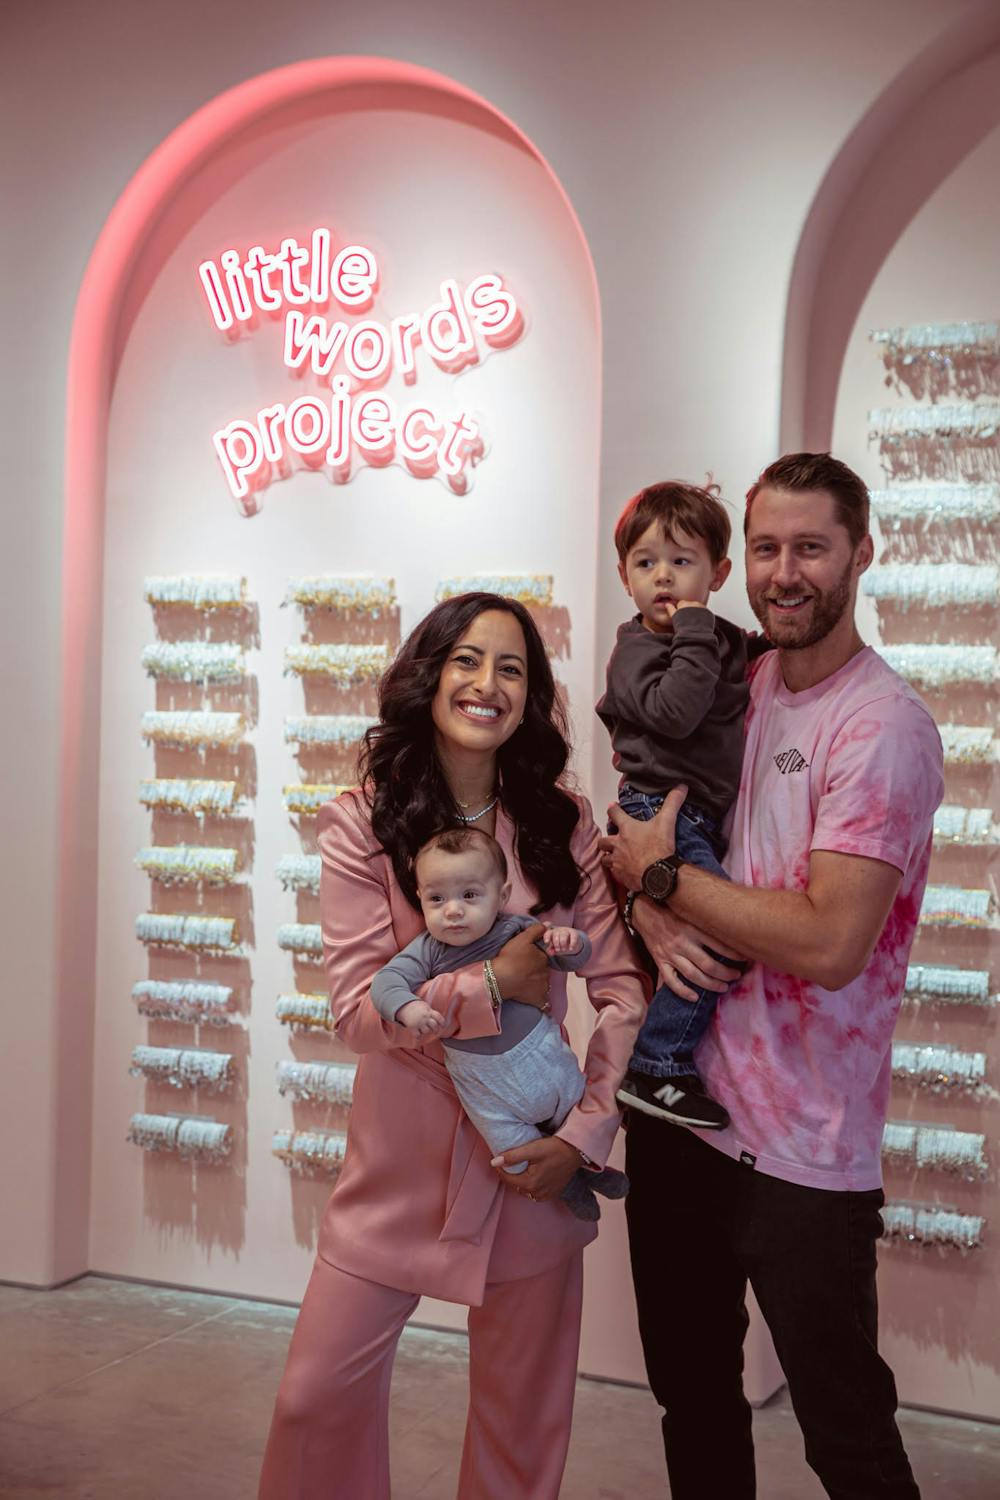 Adriana Carrig and her family (including husband Bill Carrig, TCNJ alum as well as President and COO of Little Words Project) at Little Words Project’s most recent store opening in Austin, Texas (Photo courtesy of Adriana Carrig).